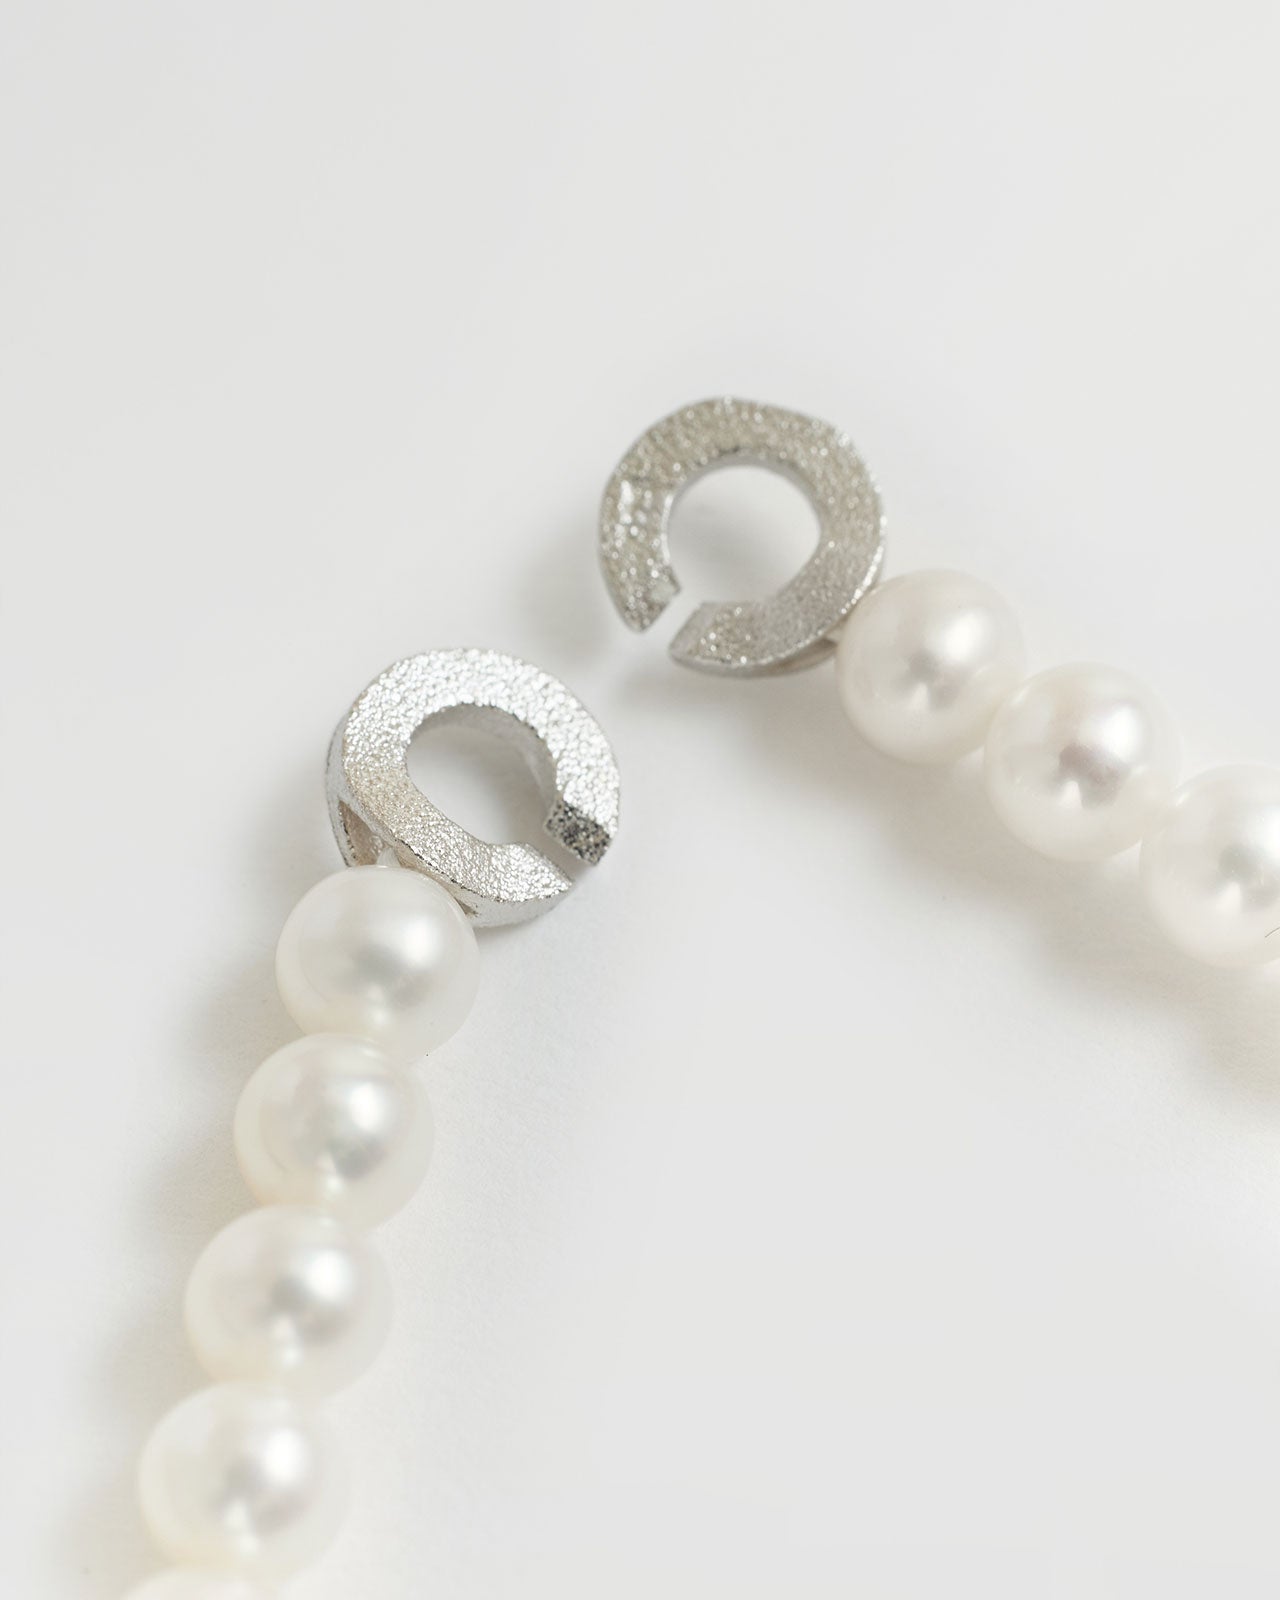 CADEAUX SMALL PEARL NECKLACE